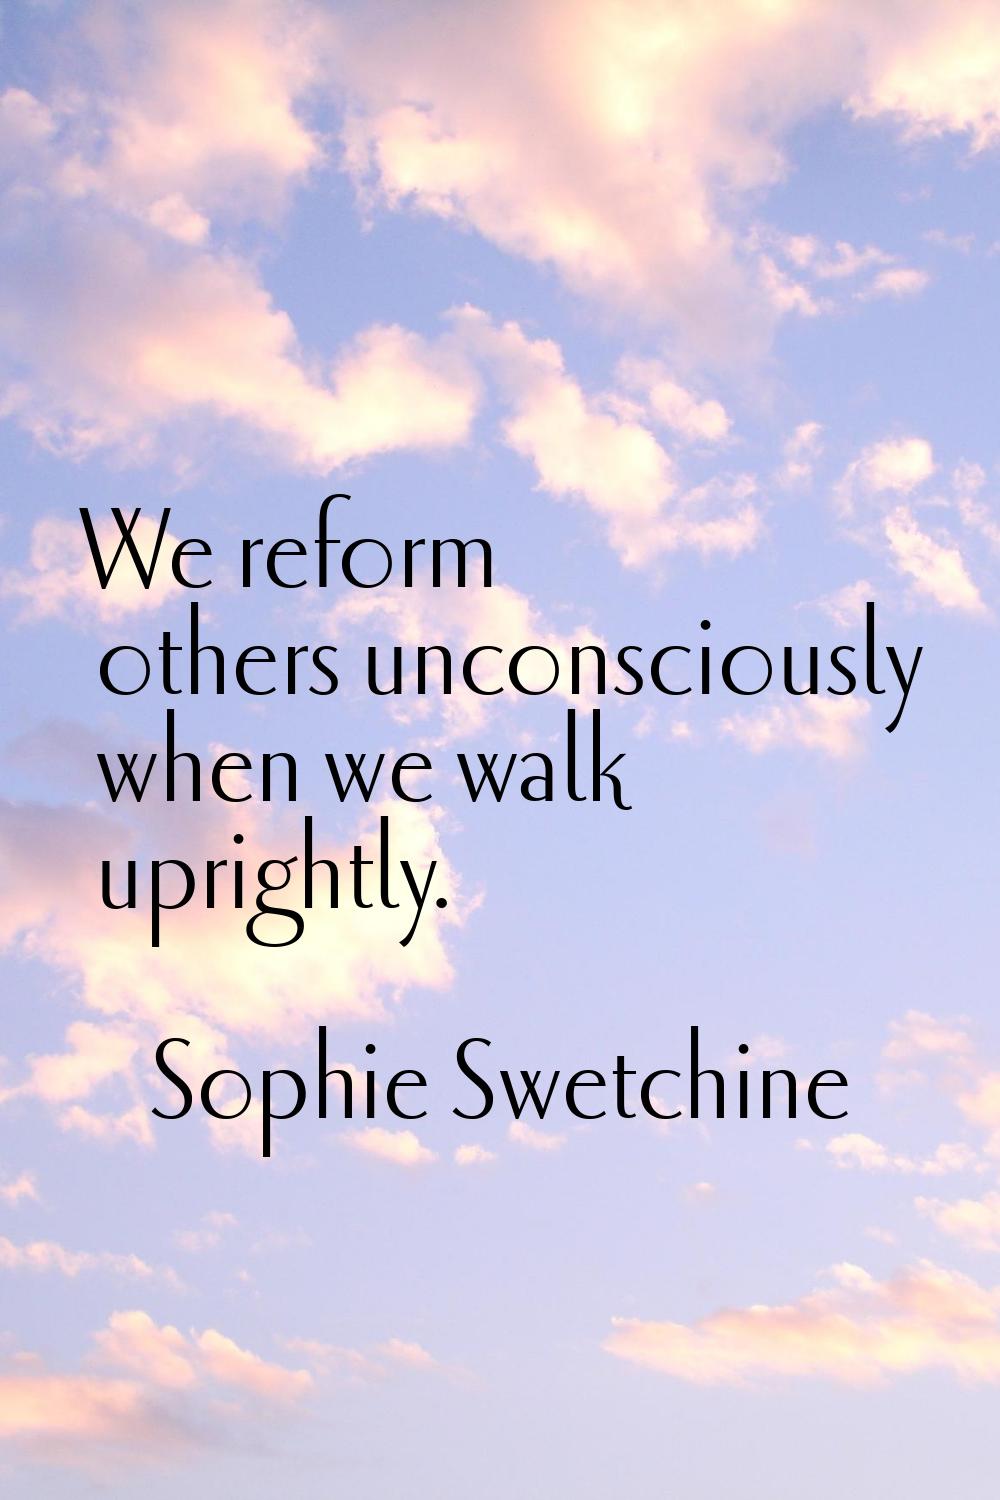 We reform others unconsciously when we walk uprightly.